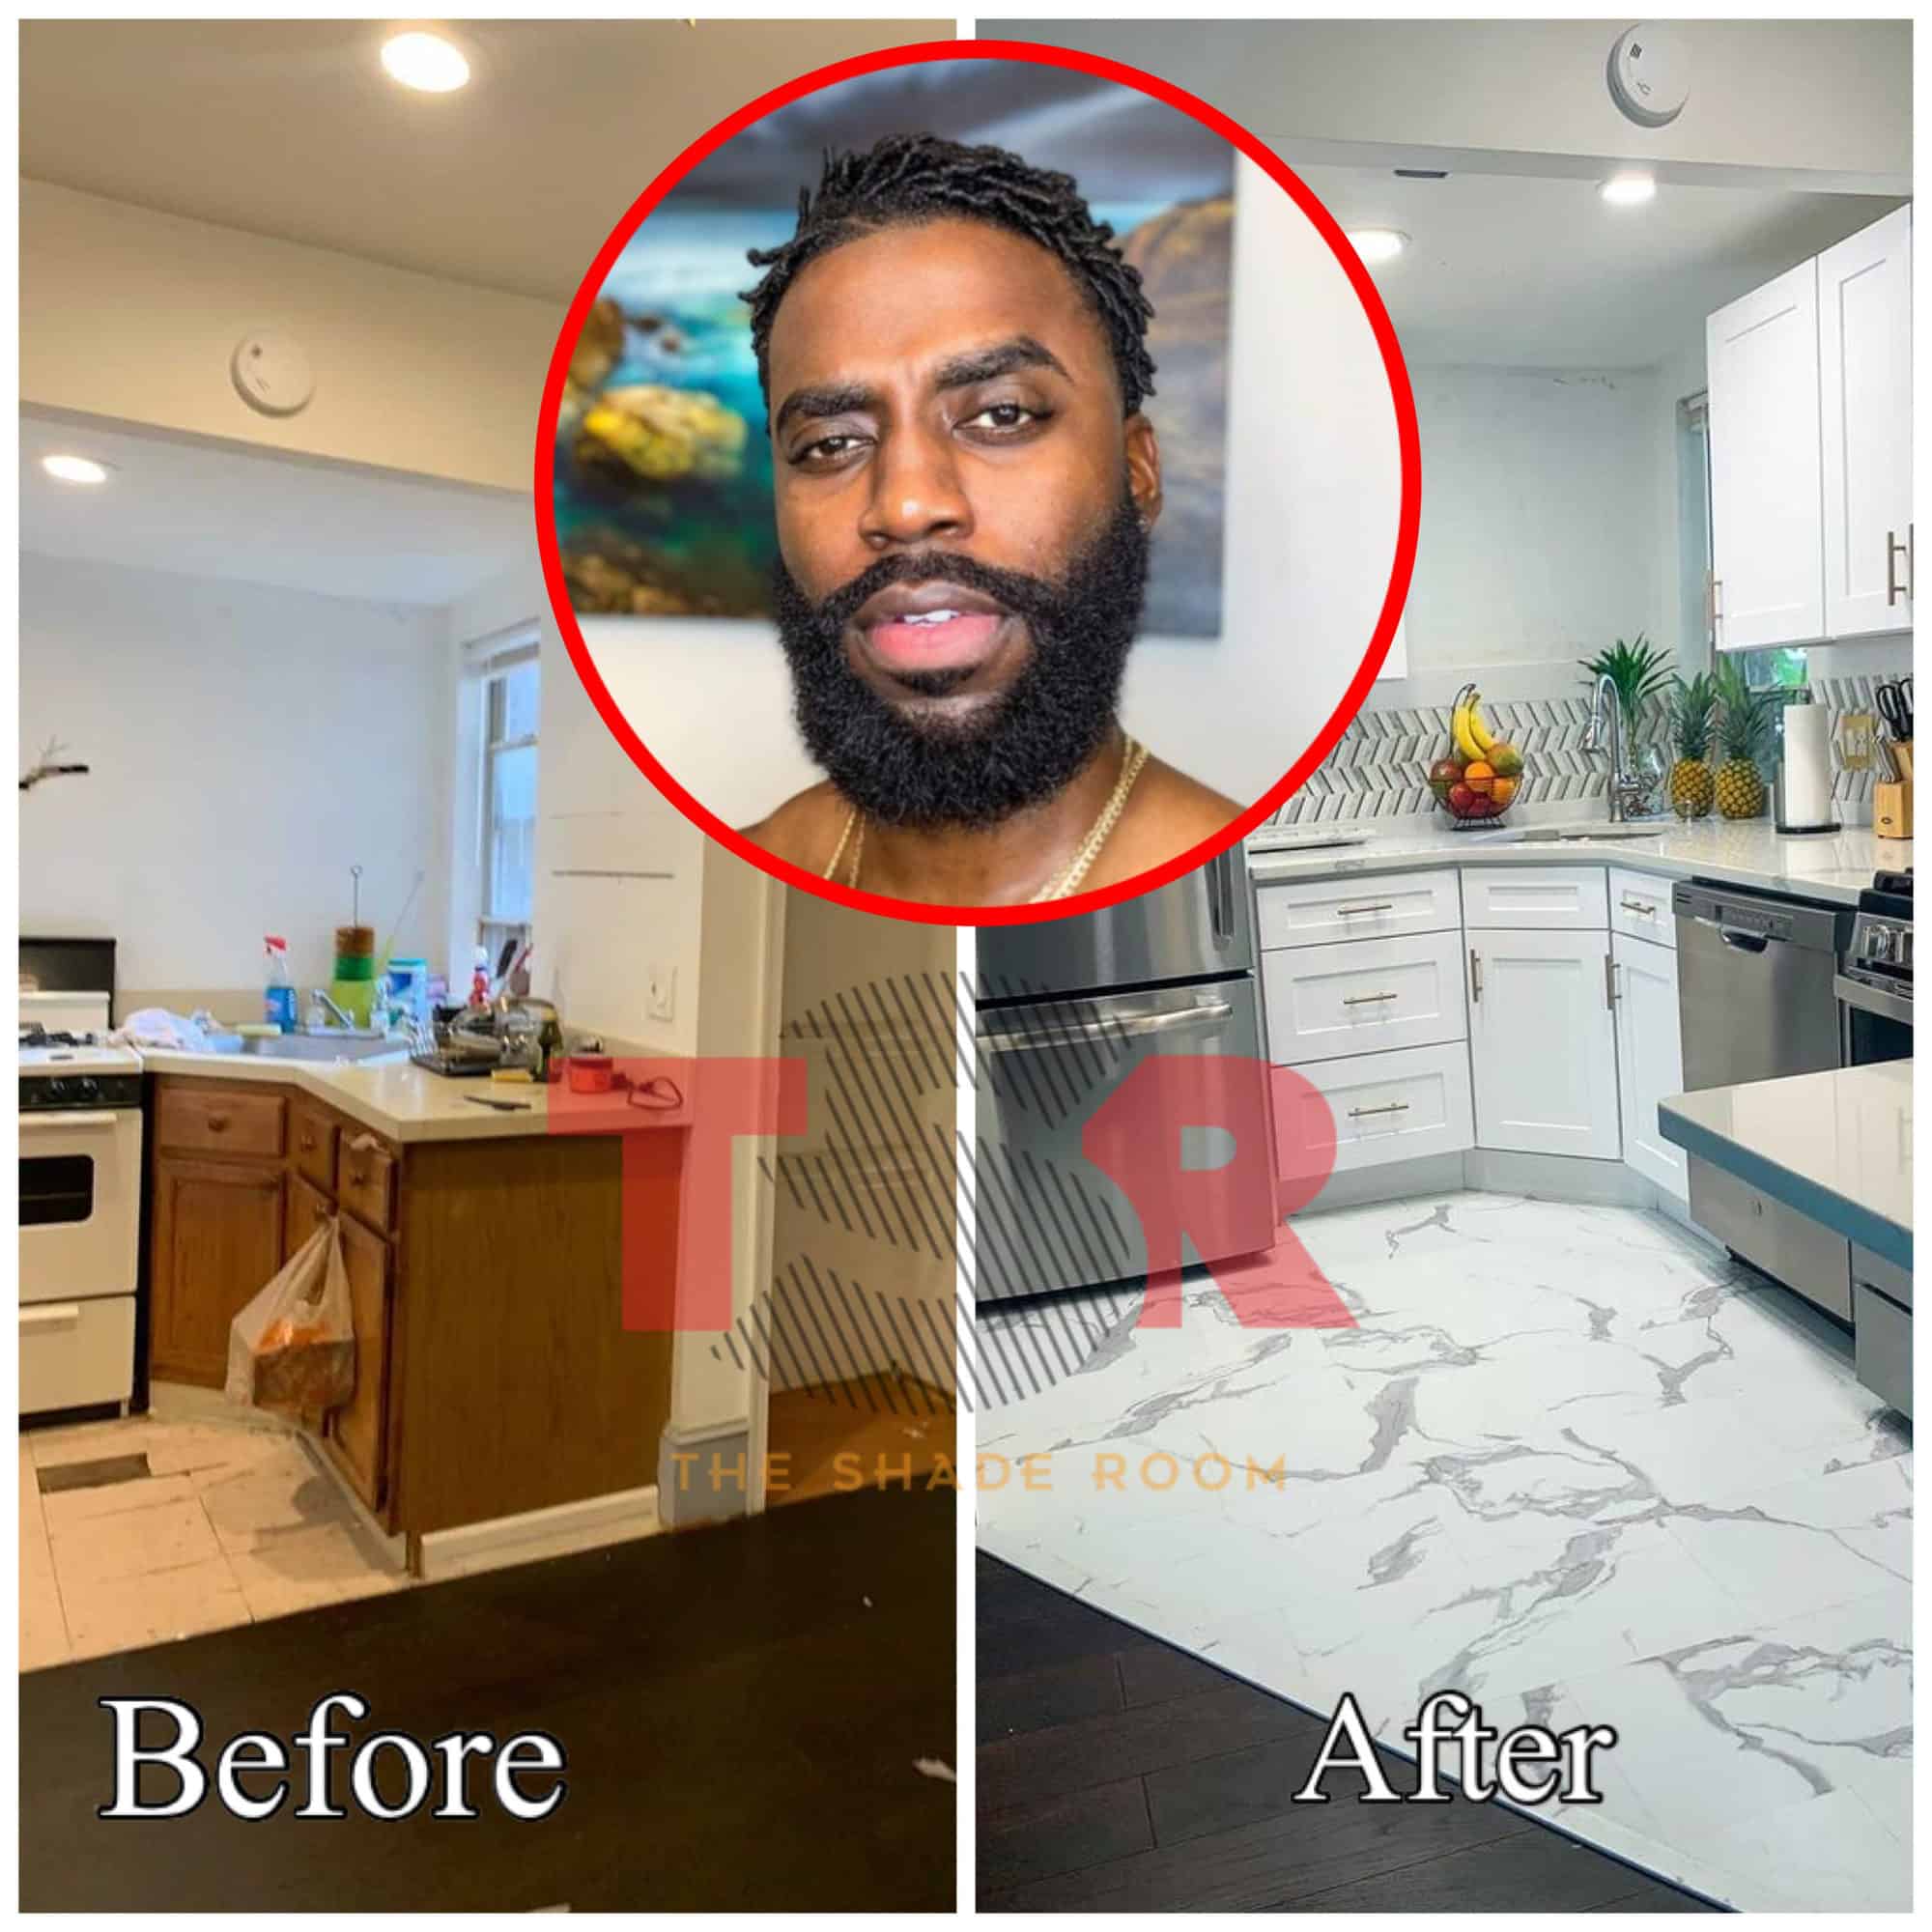 Philly Man Revamped His Kitchen With No Contracting